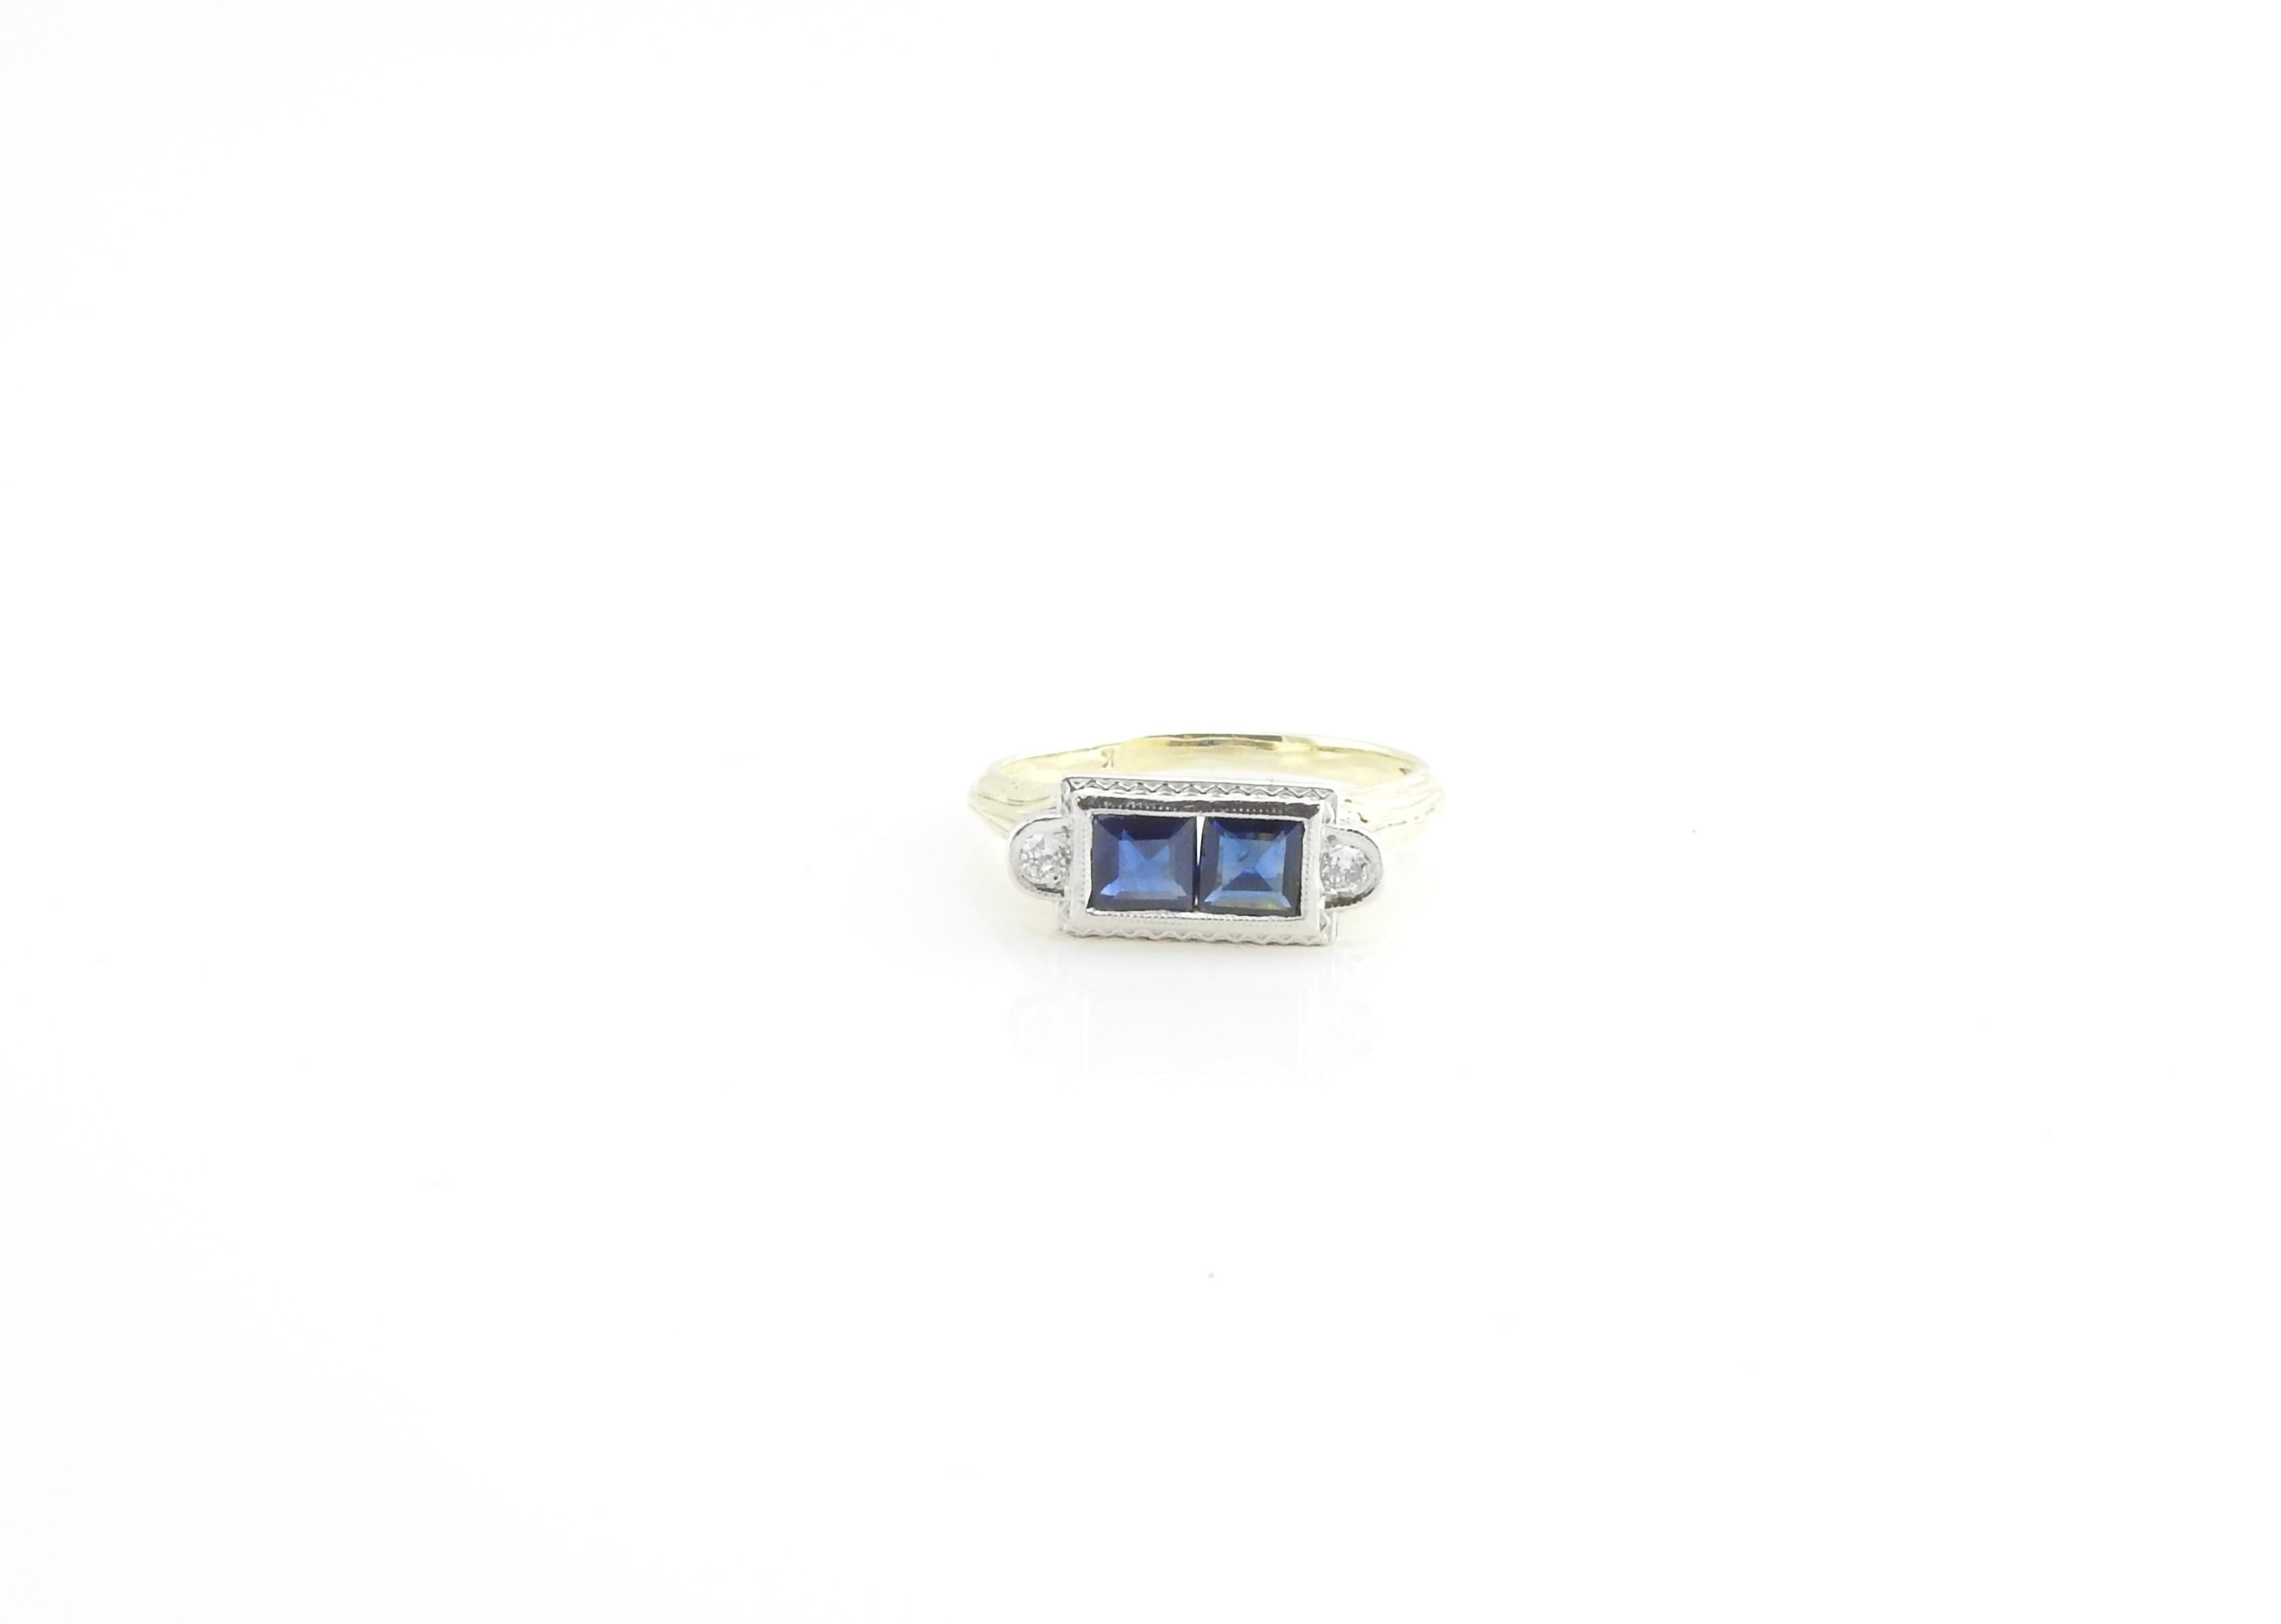 Vintage 14 Karat Yellow and White Gold Sapphire and Diamond Ring Size 6.5-

This lovely ring features two square sapphires and two round brilliant cut diamonds set in beautifully detailed 14K yellow and white gold filigree.  

Two princess sapphires